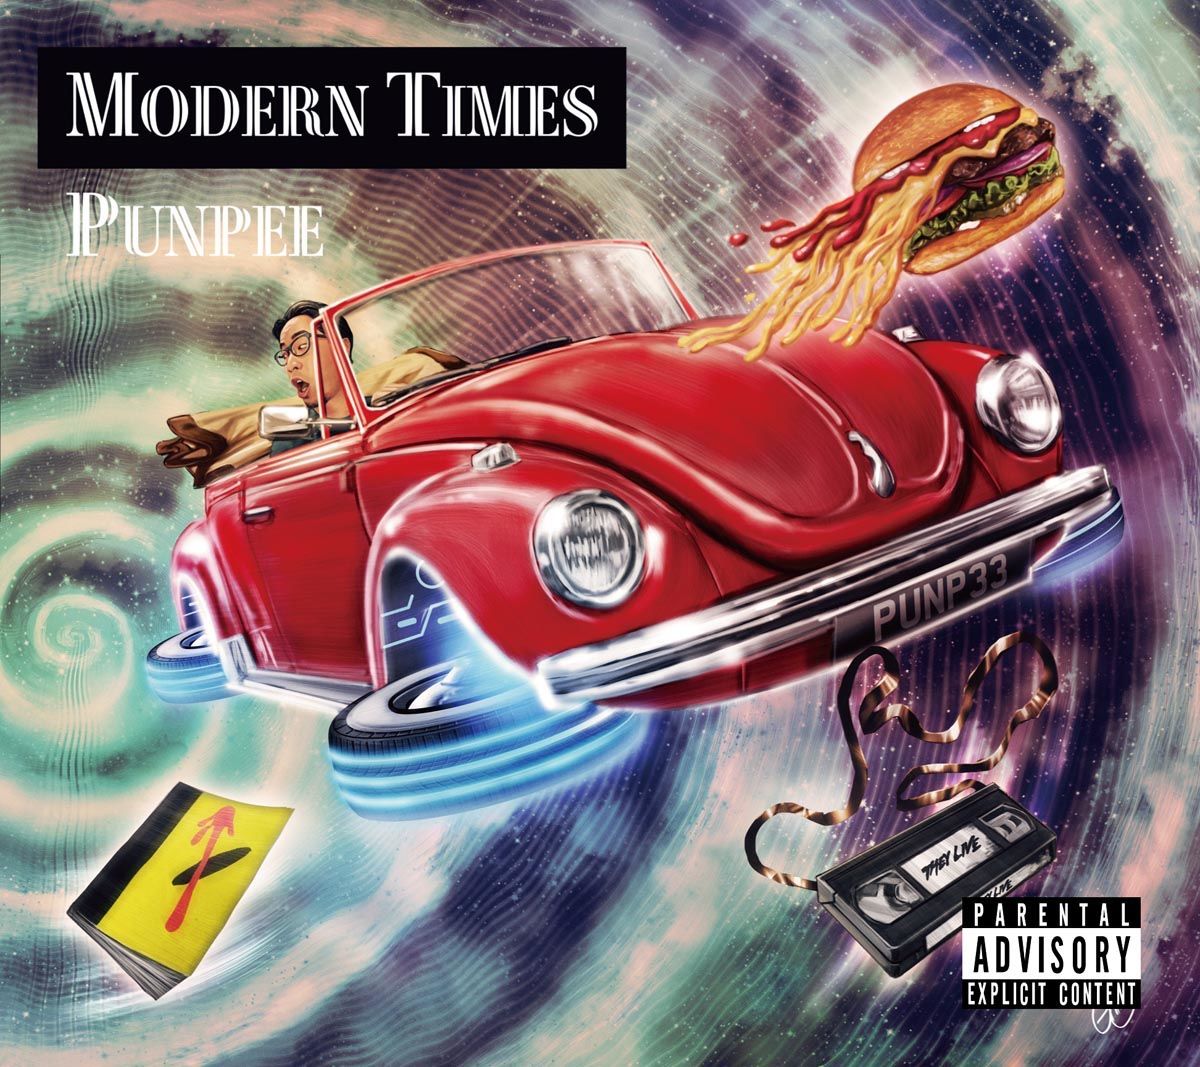 PUNPEEが『MODERN TIMES』を解説する『MODERN TIMES -Commentary-』のサブスク配信決定！ music180308-punpee-1-1200x1067